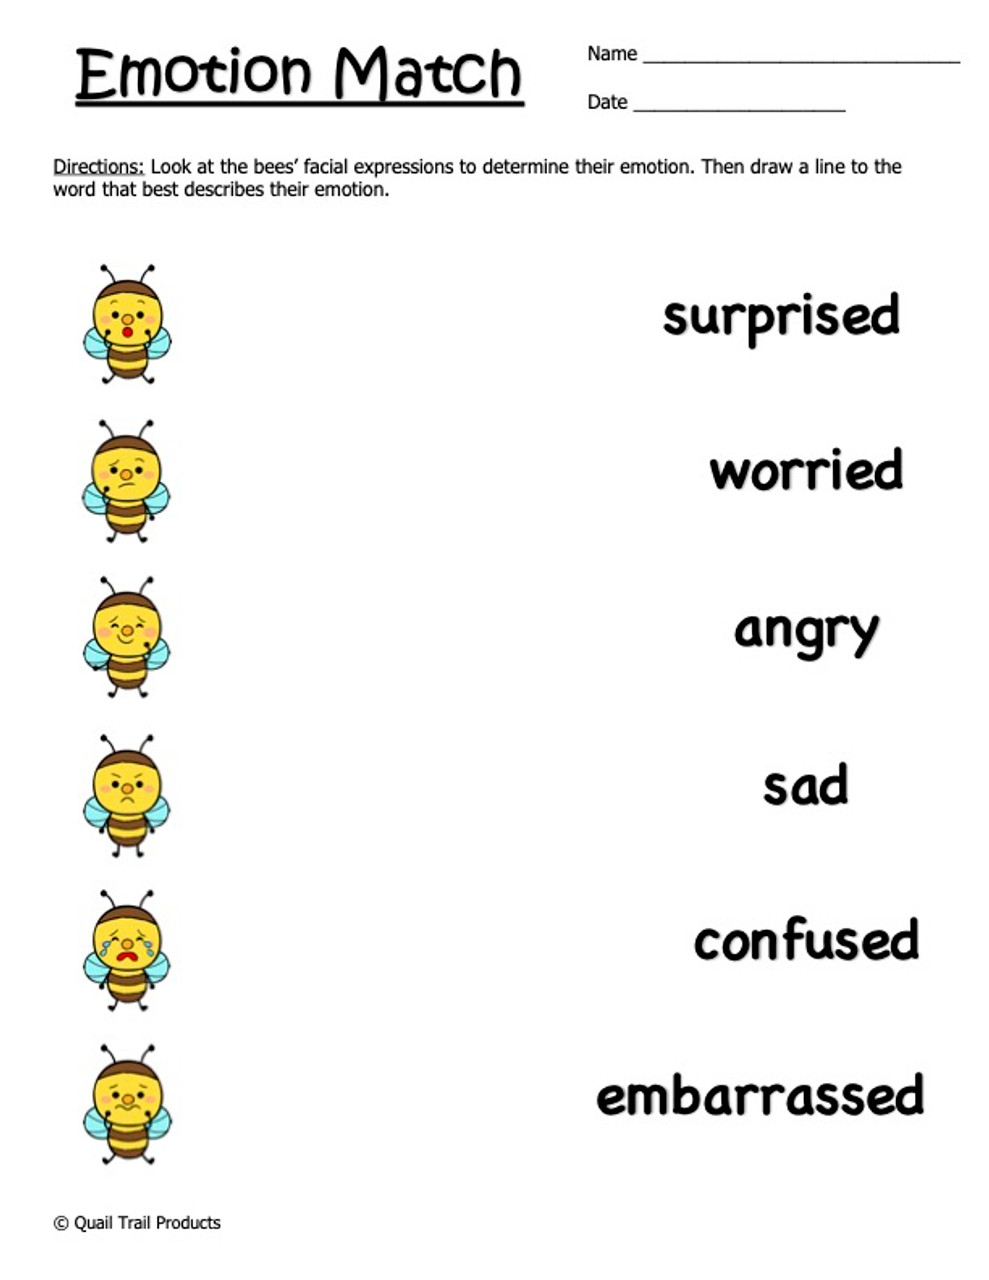 Match the Emotions worksheet